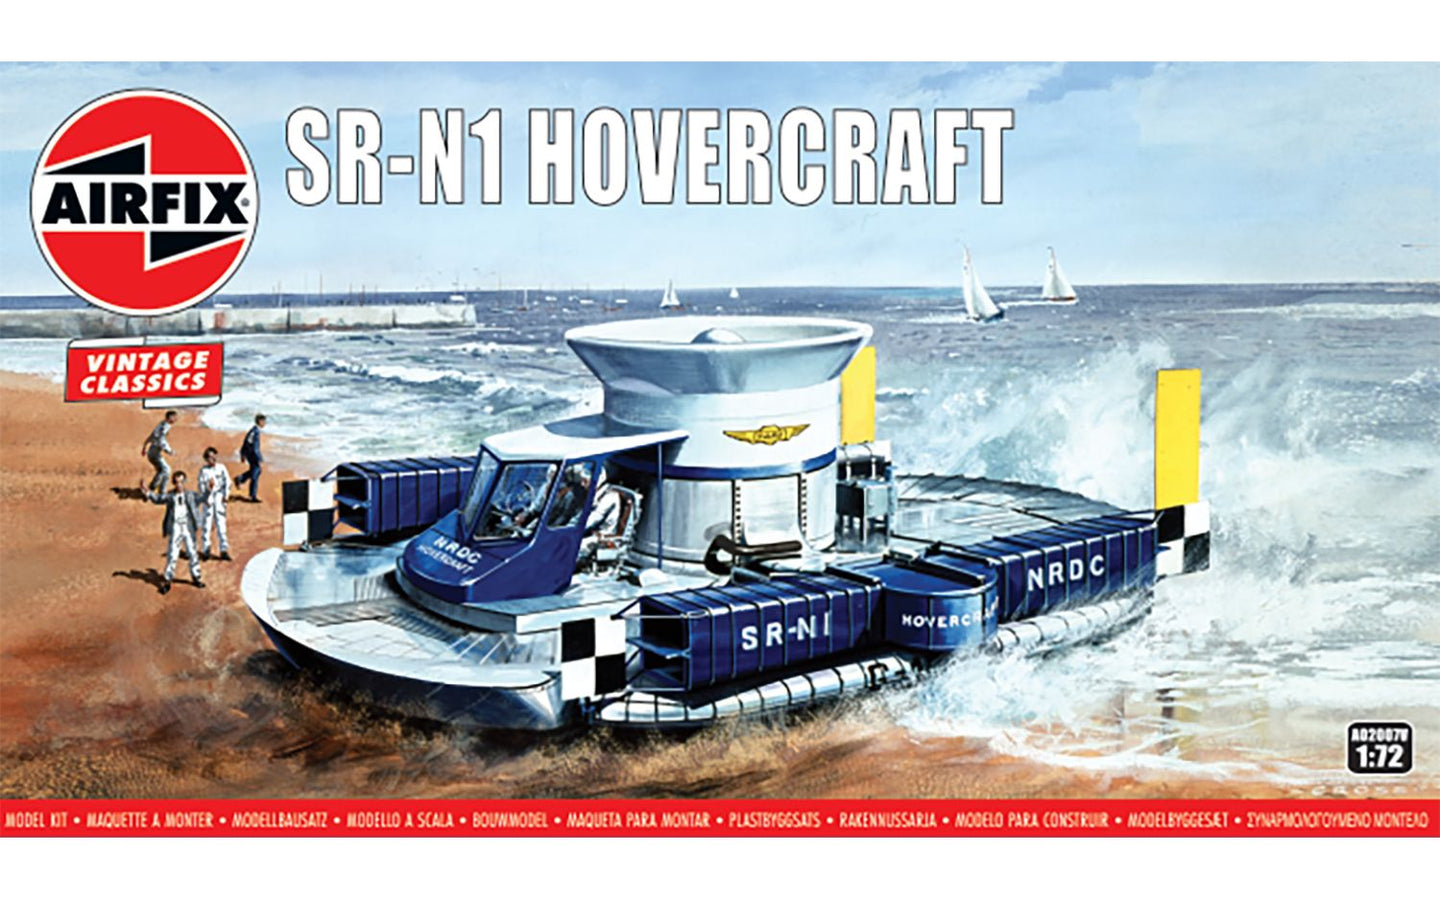 Airfix 1/72 SR-N1 Hovercraft A02007V IN STOCK NOW!